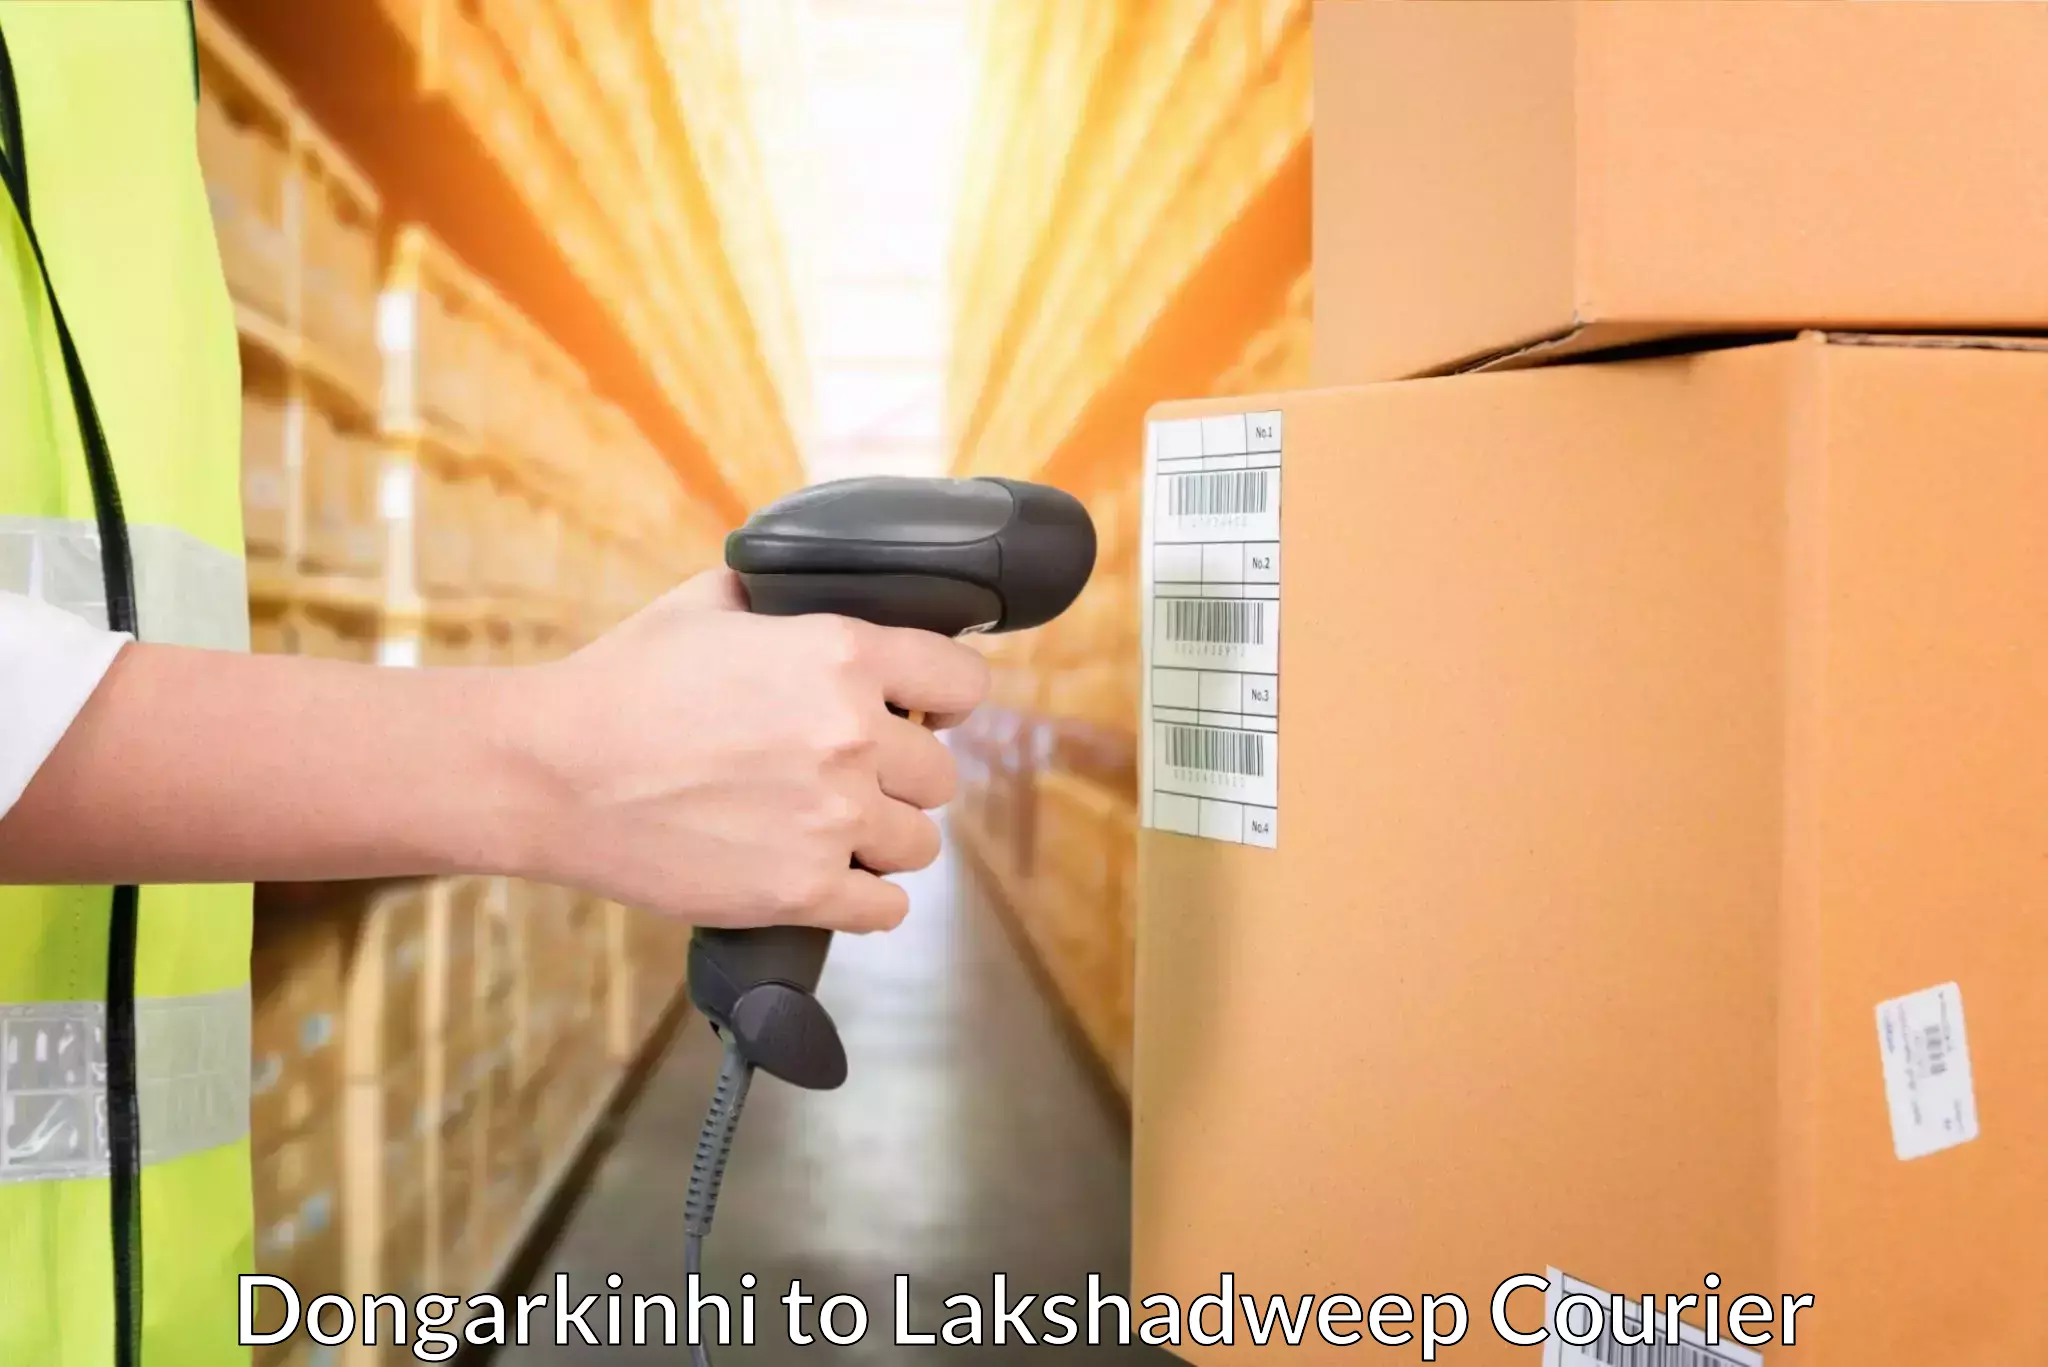 Courier service comparison Dongarkinhi to Lakshadweep